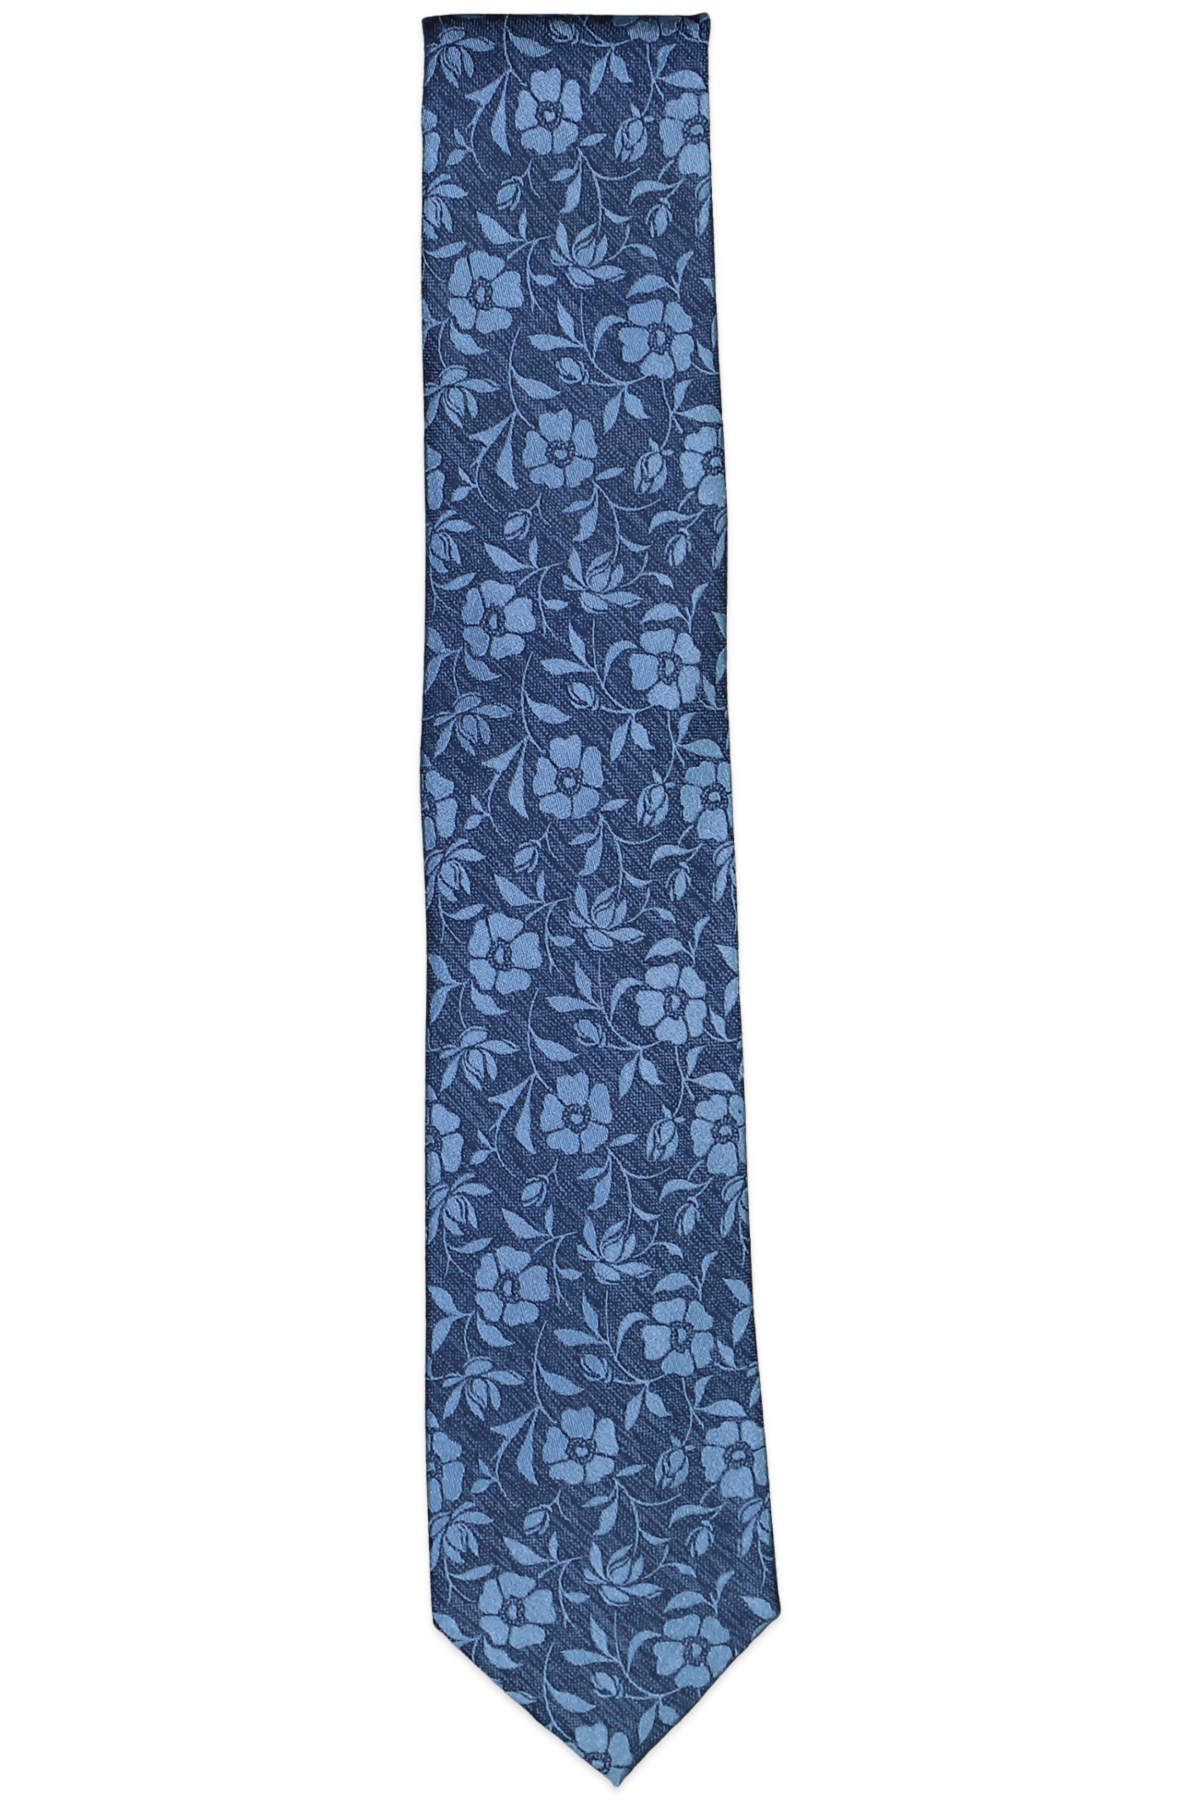 NAVY BLUE DESIGNS/HARRY BACHRACH IN TONAL FLORAL NAVY